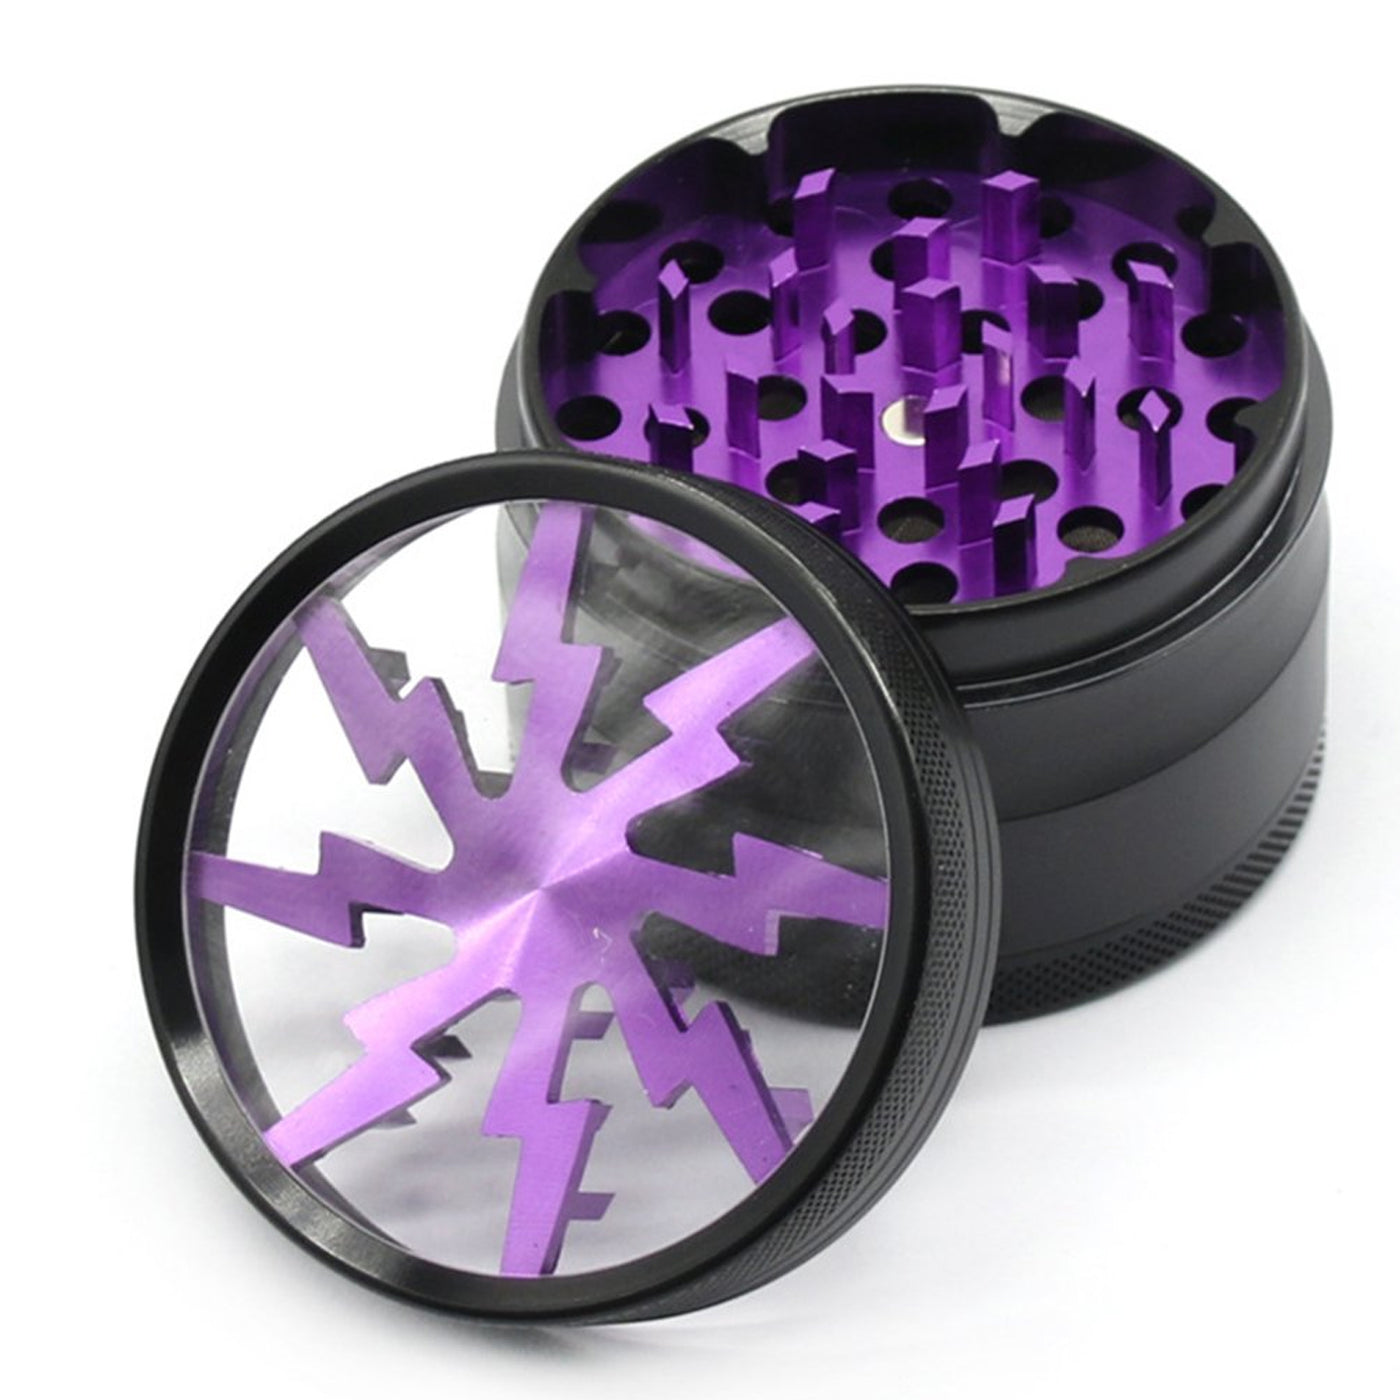 Metal Spice Herb Grinder 4 Layers Clear Top Lightning Herb Mill and Spice Tools Purple